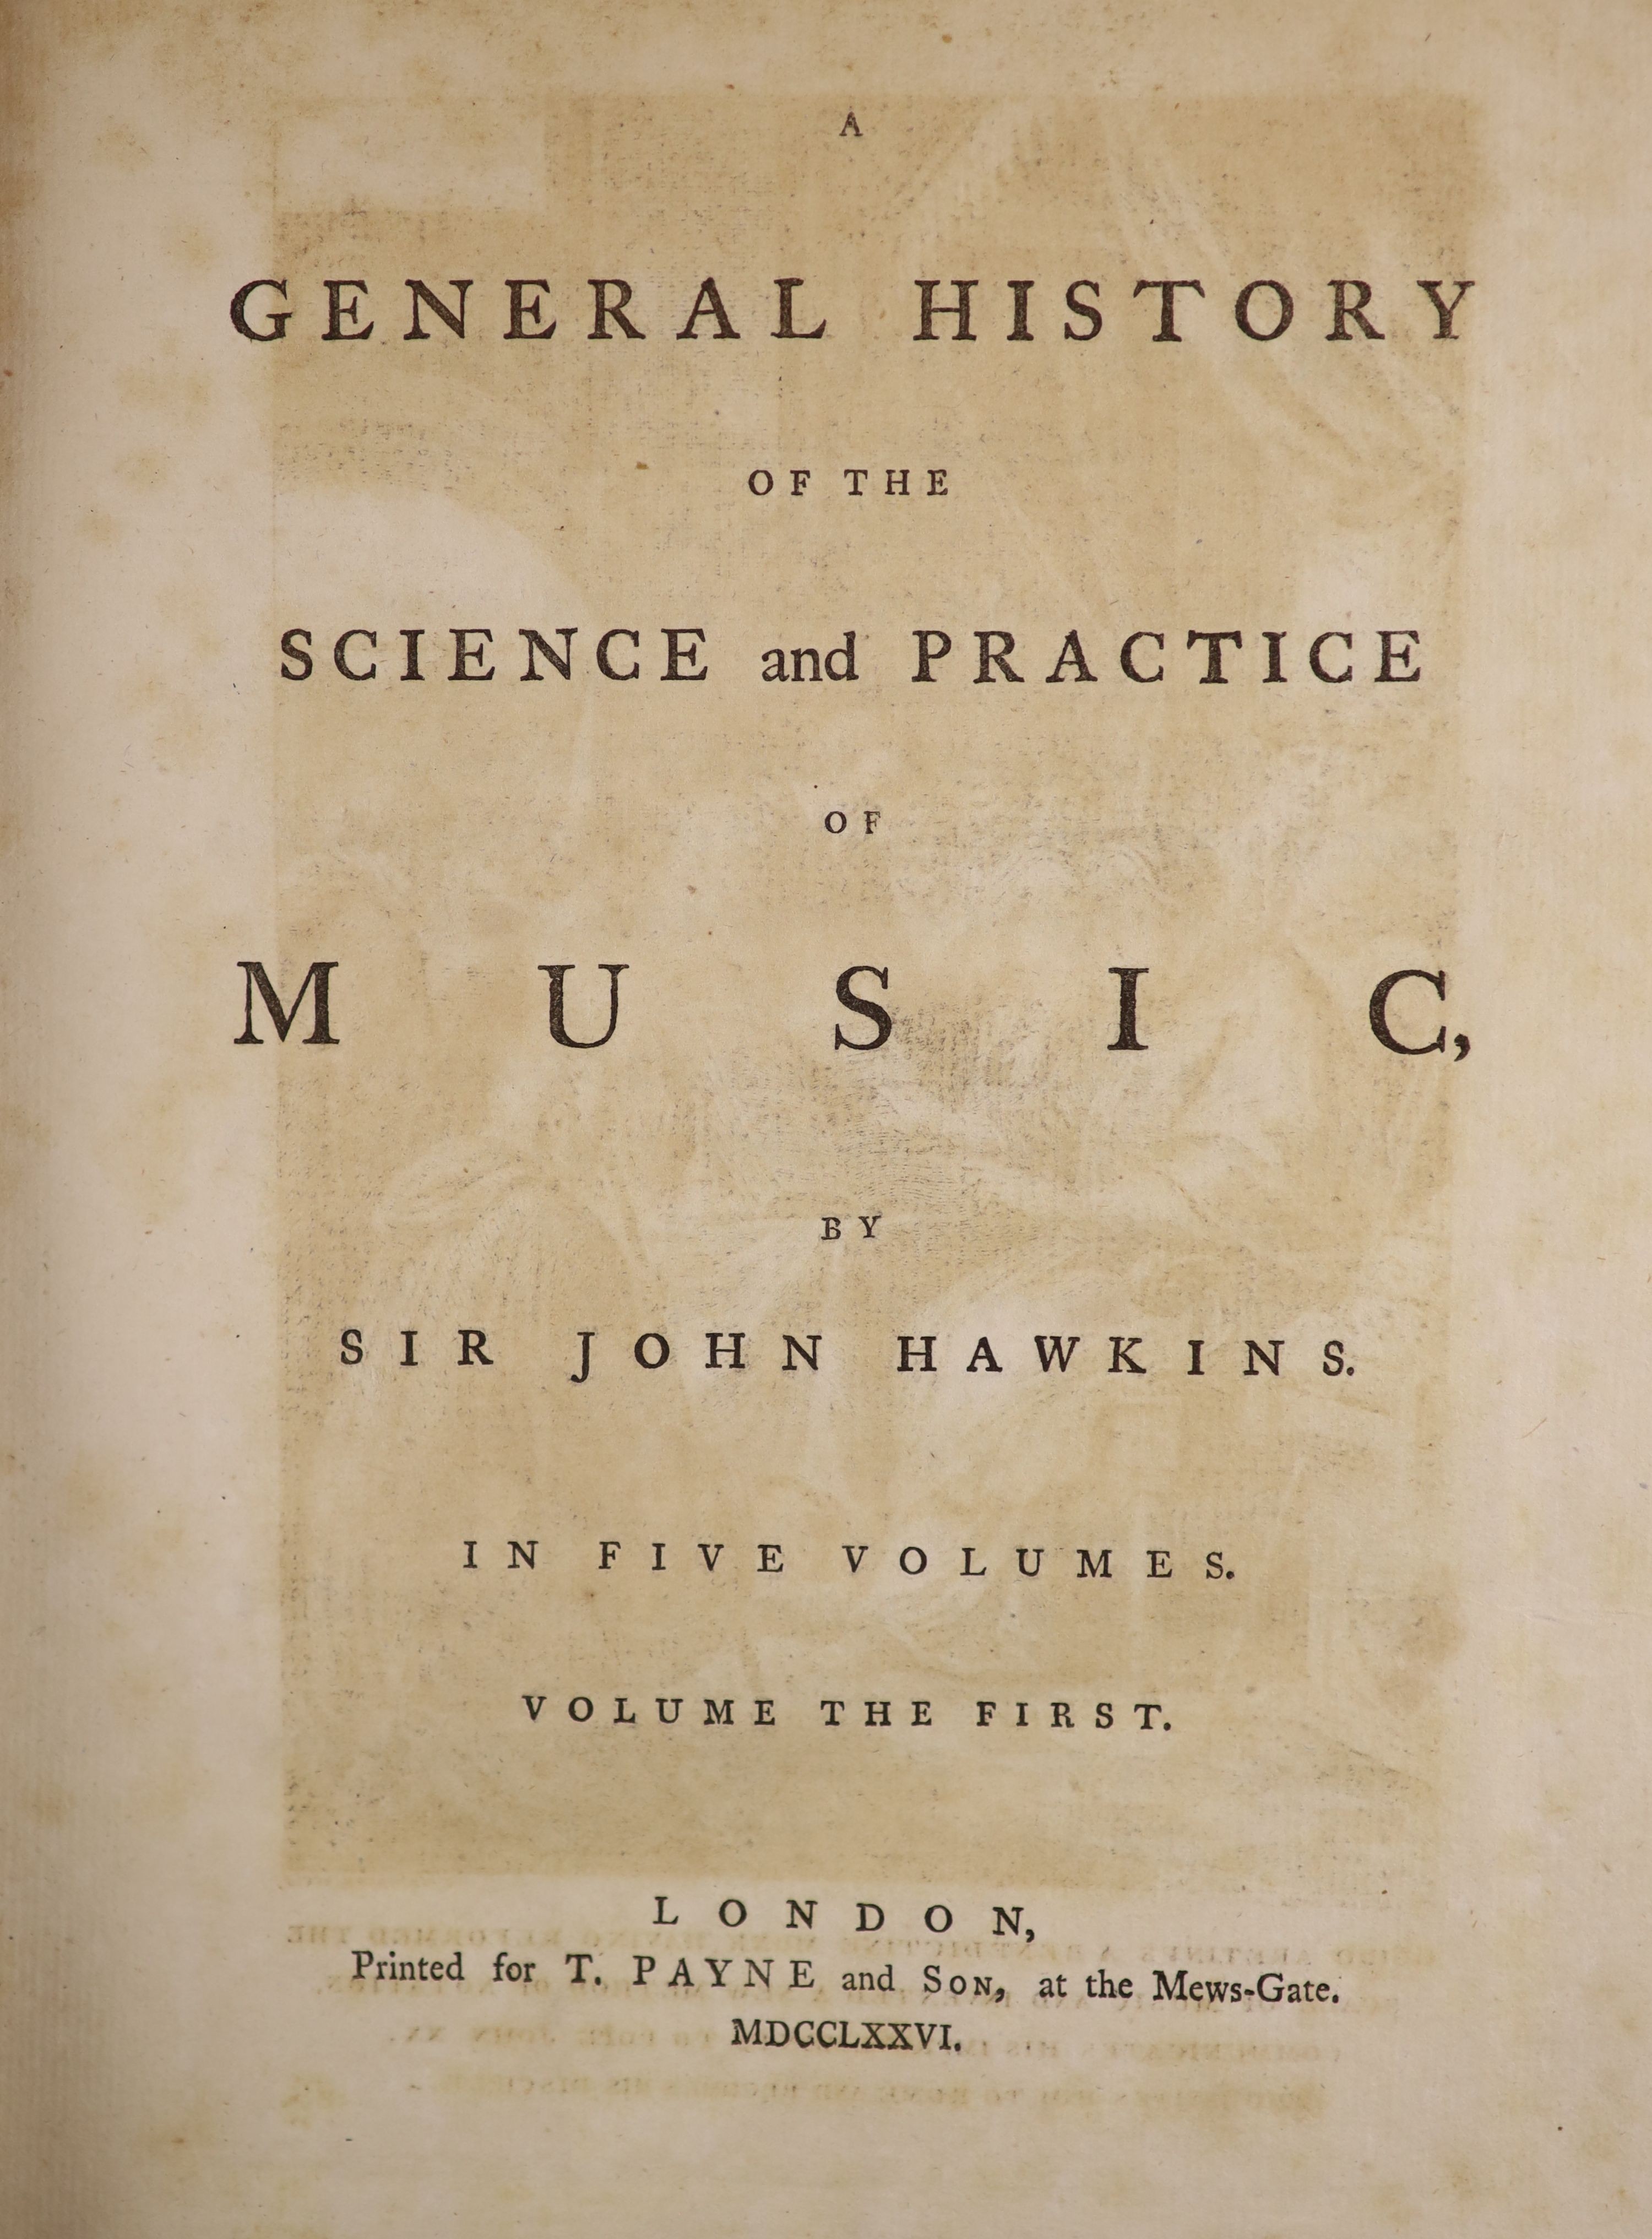 Hawkins, John - A General History of the Science and Practice of Music. 5 vols, complete with engraved frontis to vol 1, numerous text illustrations and musical notation throughout. Quarter board with blue paper overlay.